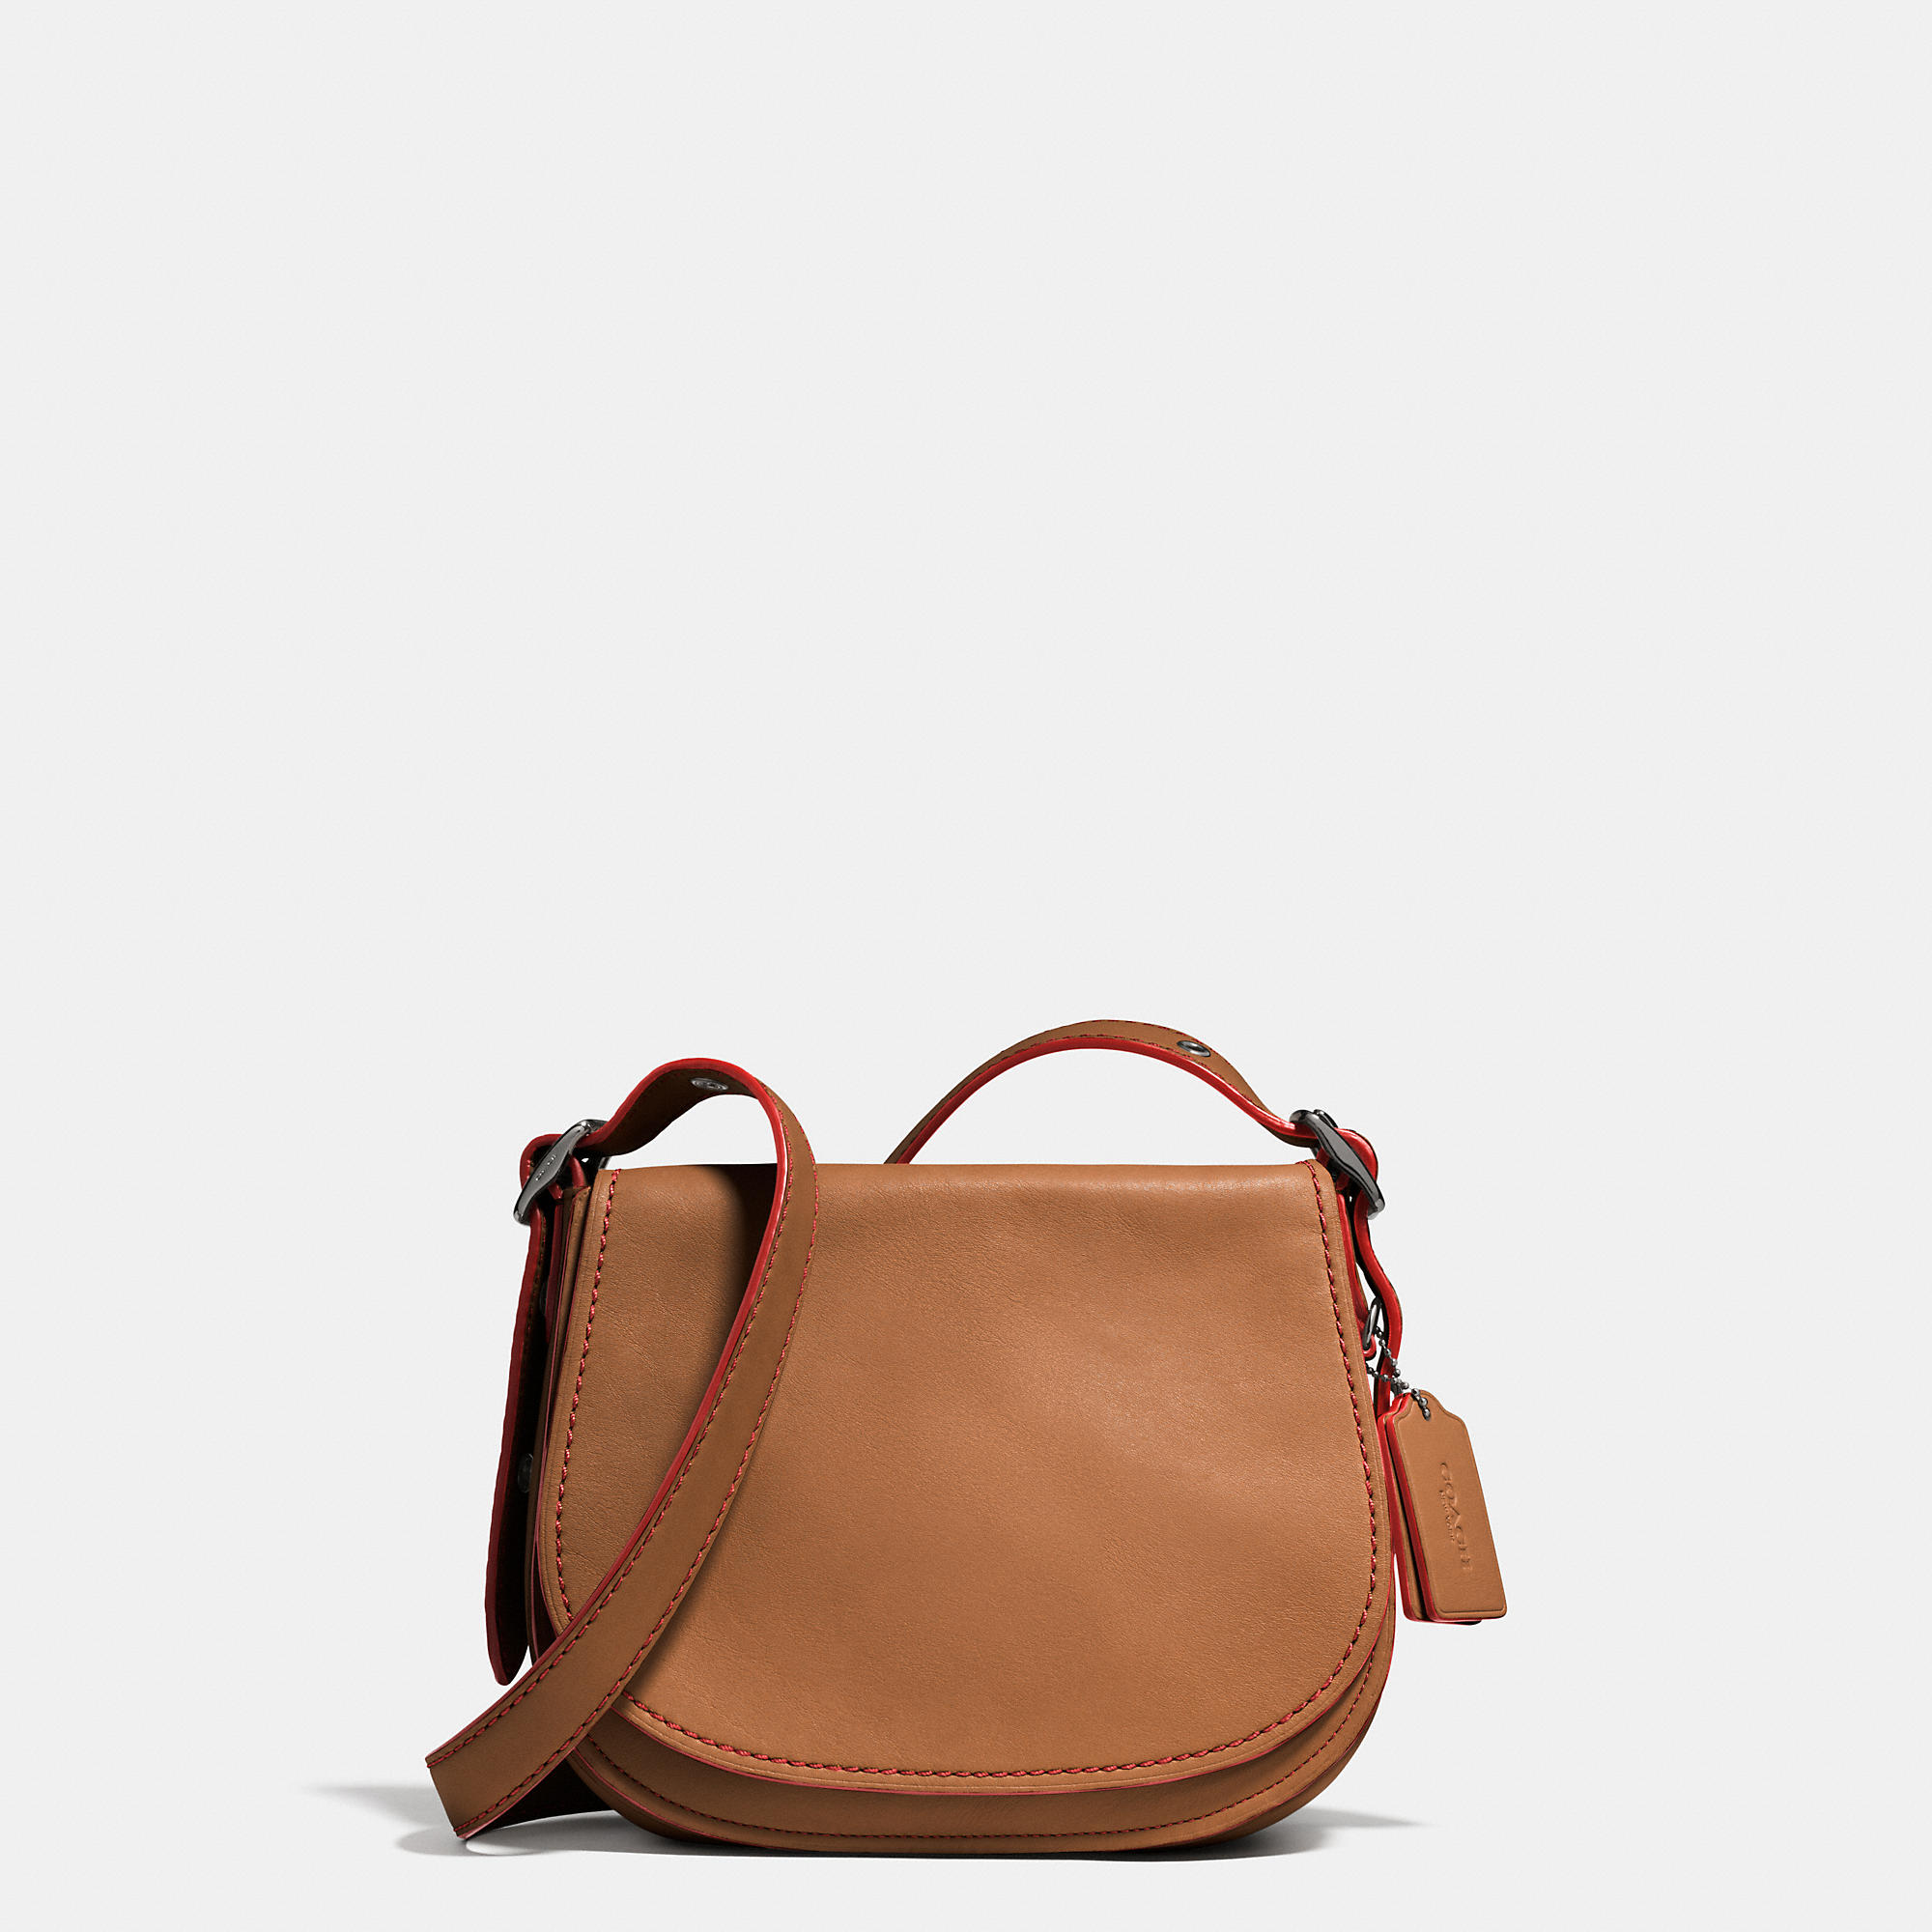 Fashion Summer Sweet Coach Saddle Bag 23 In Glovetanned Leather | Coach Outlet Canada